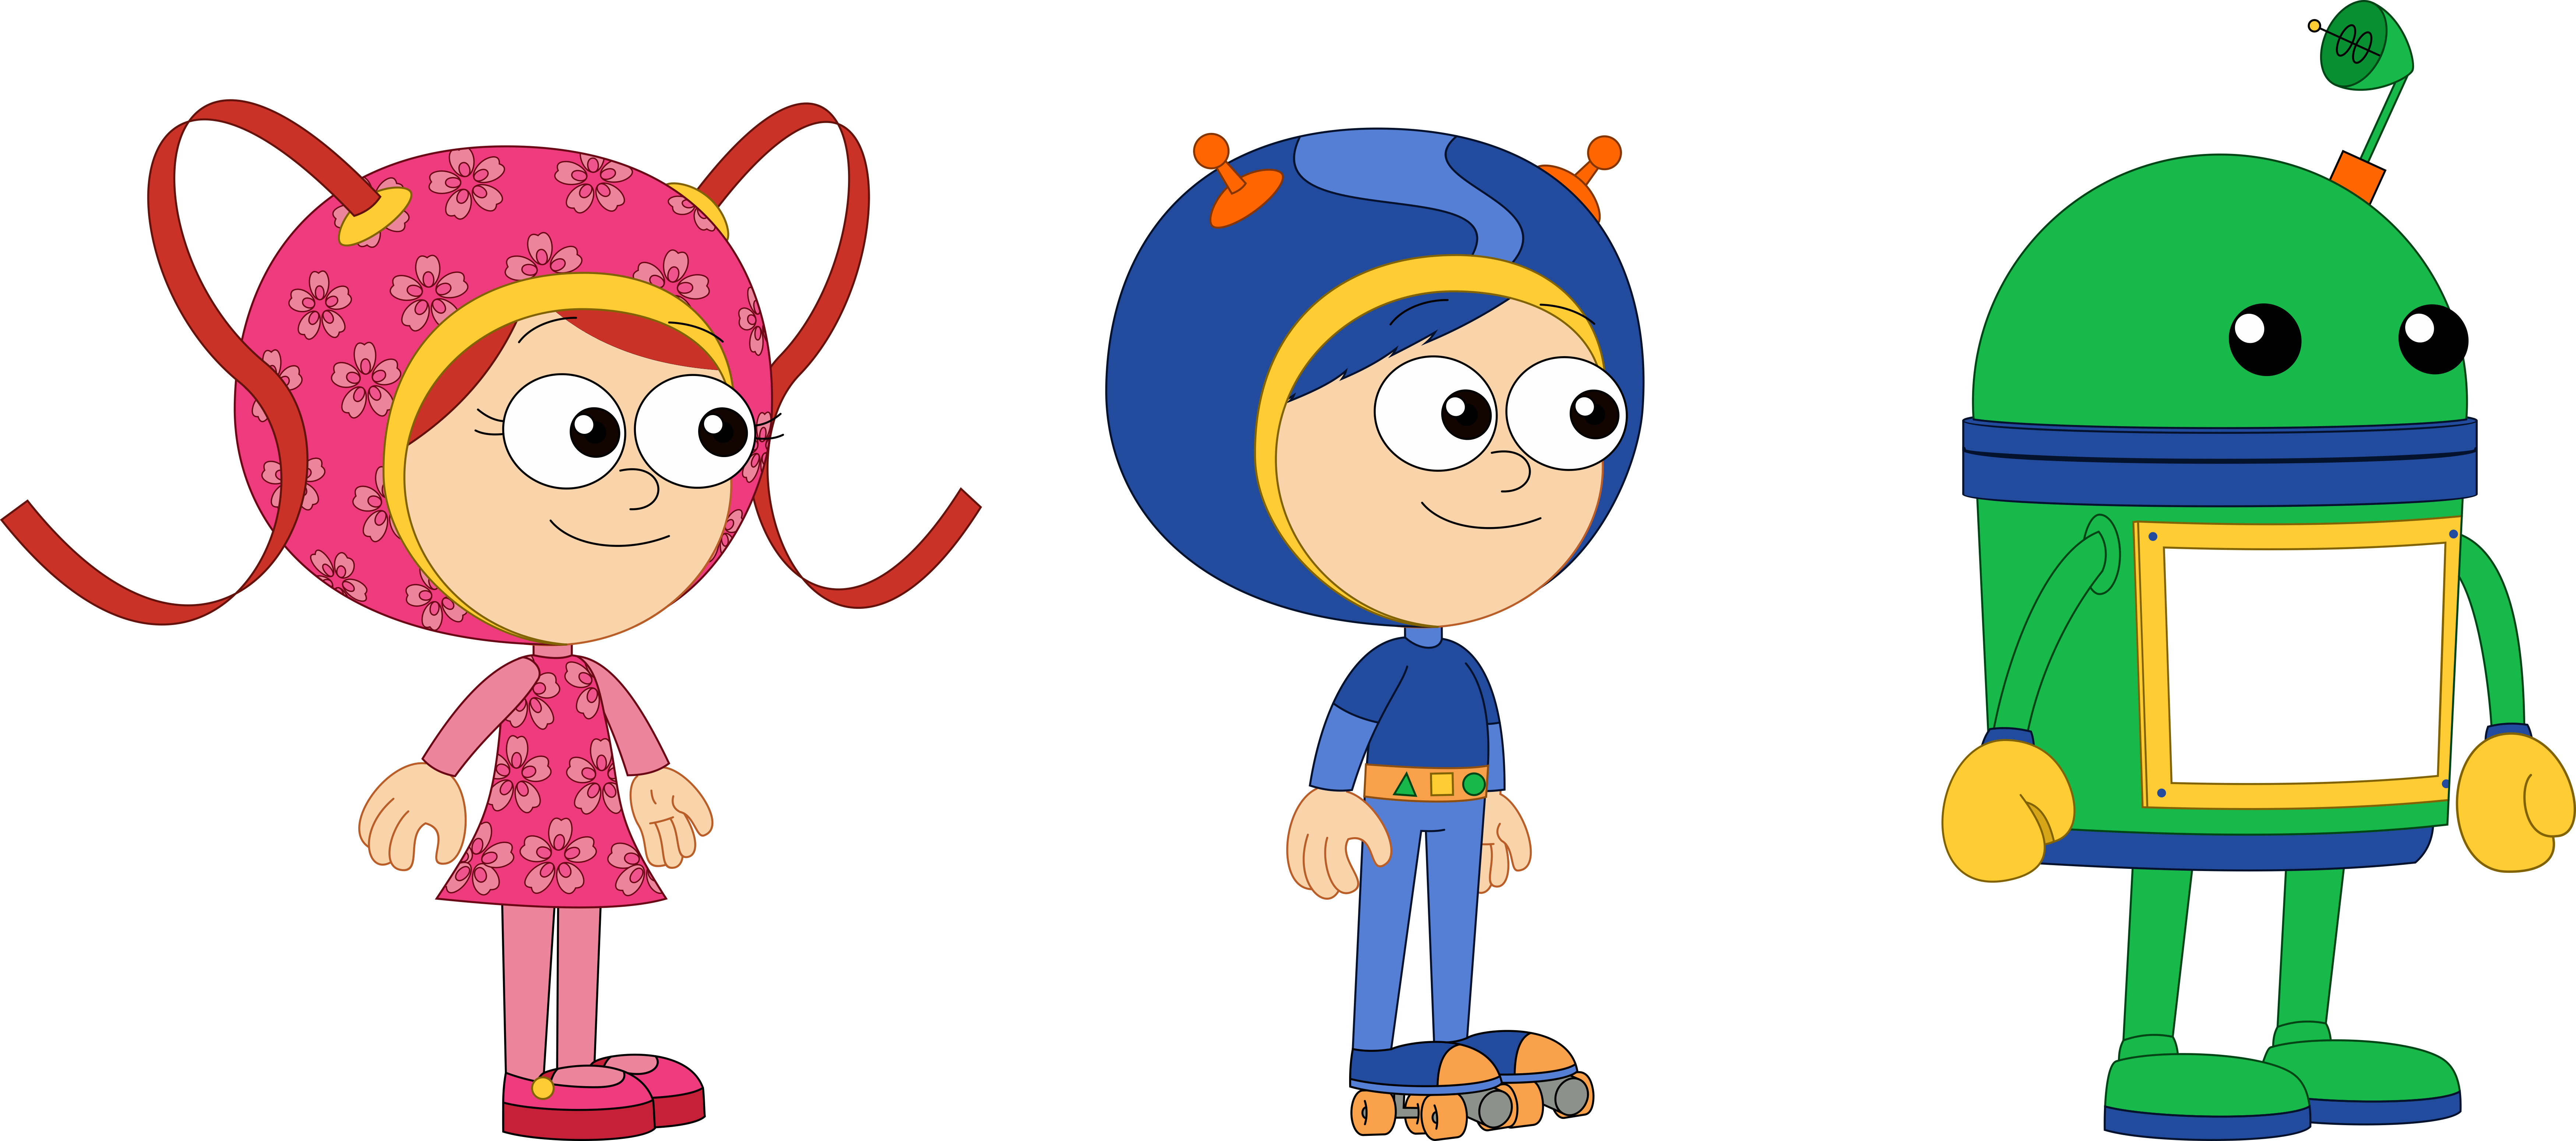 Team Umizoomi in PnF Style by ncontreras207 on DeviantArt